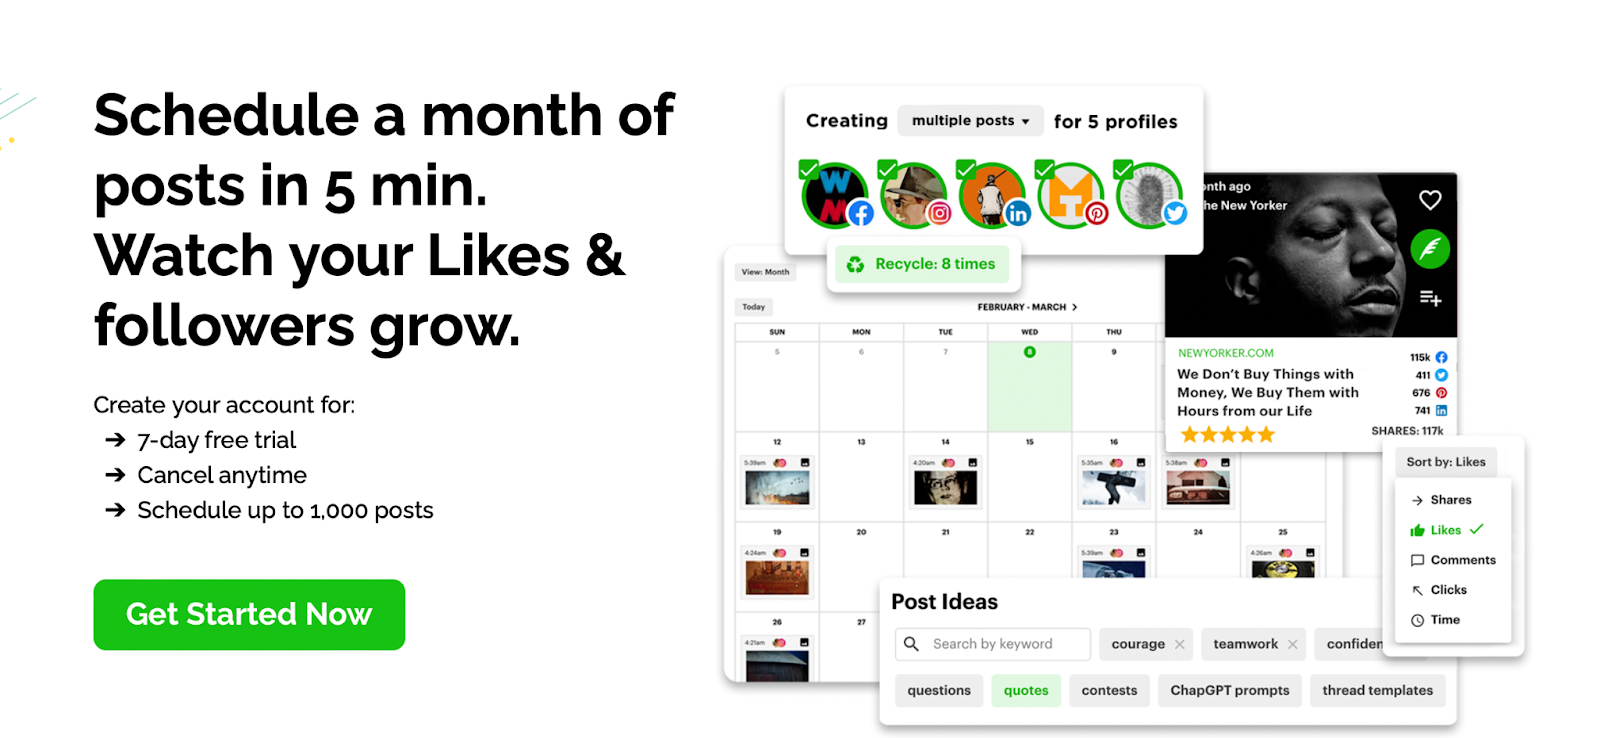 Post Planner makes it easy to manage multiple social media accounts from one place.